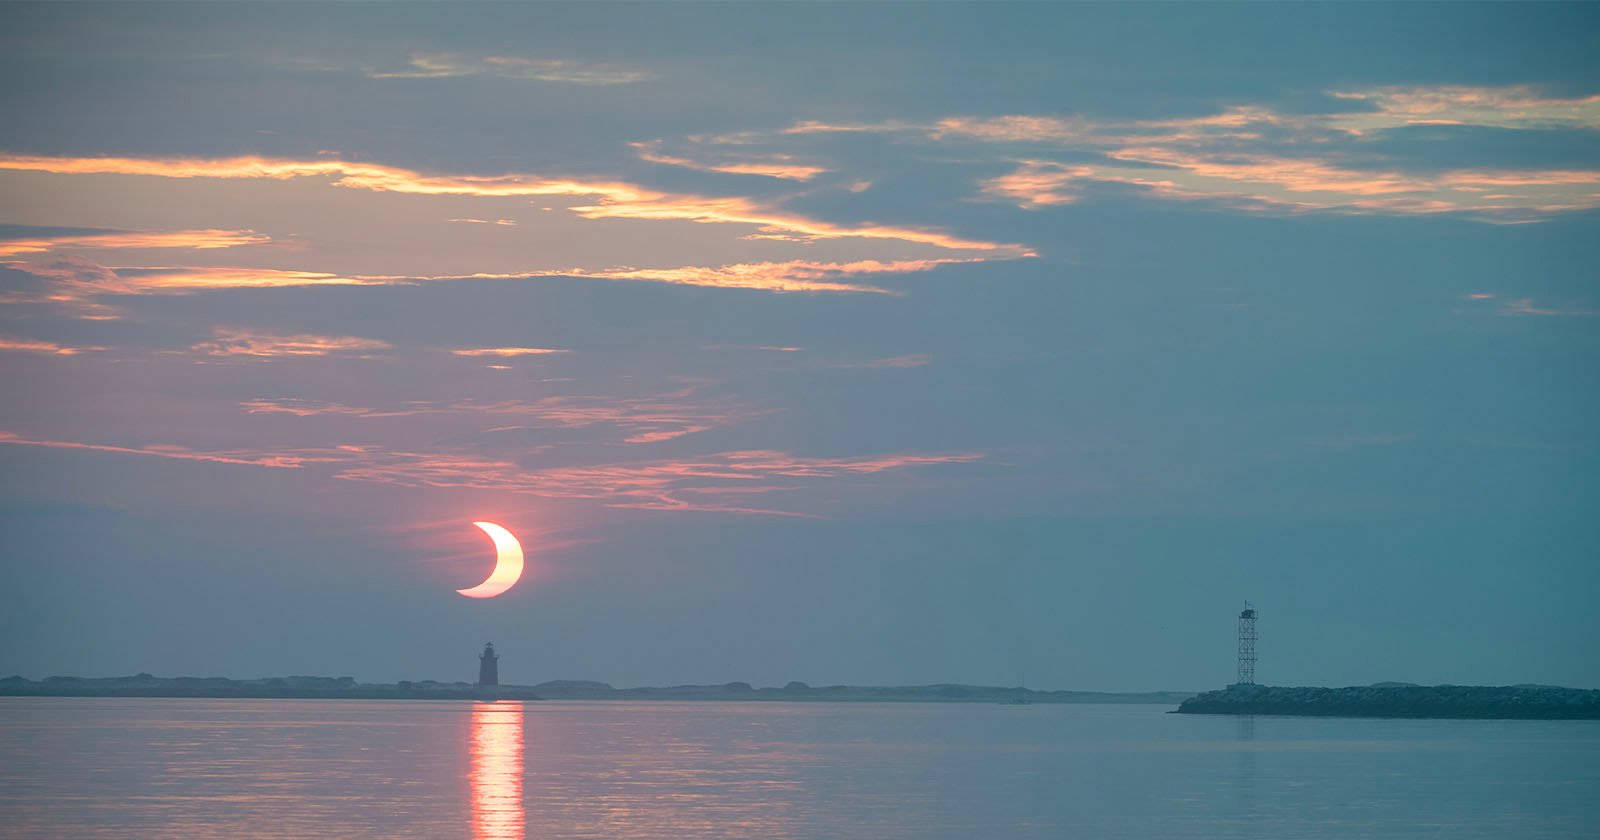 A partial eclipse is shown above a waterscape.